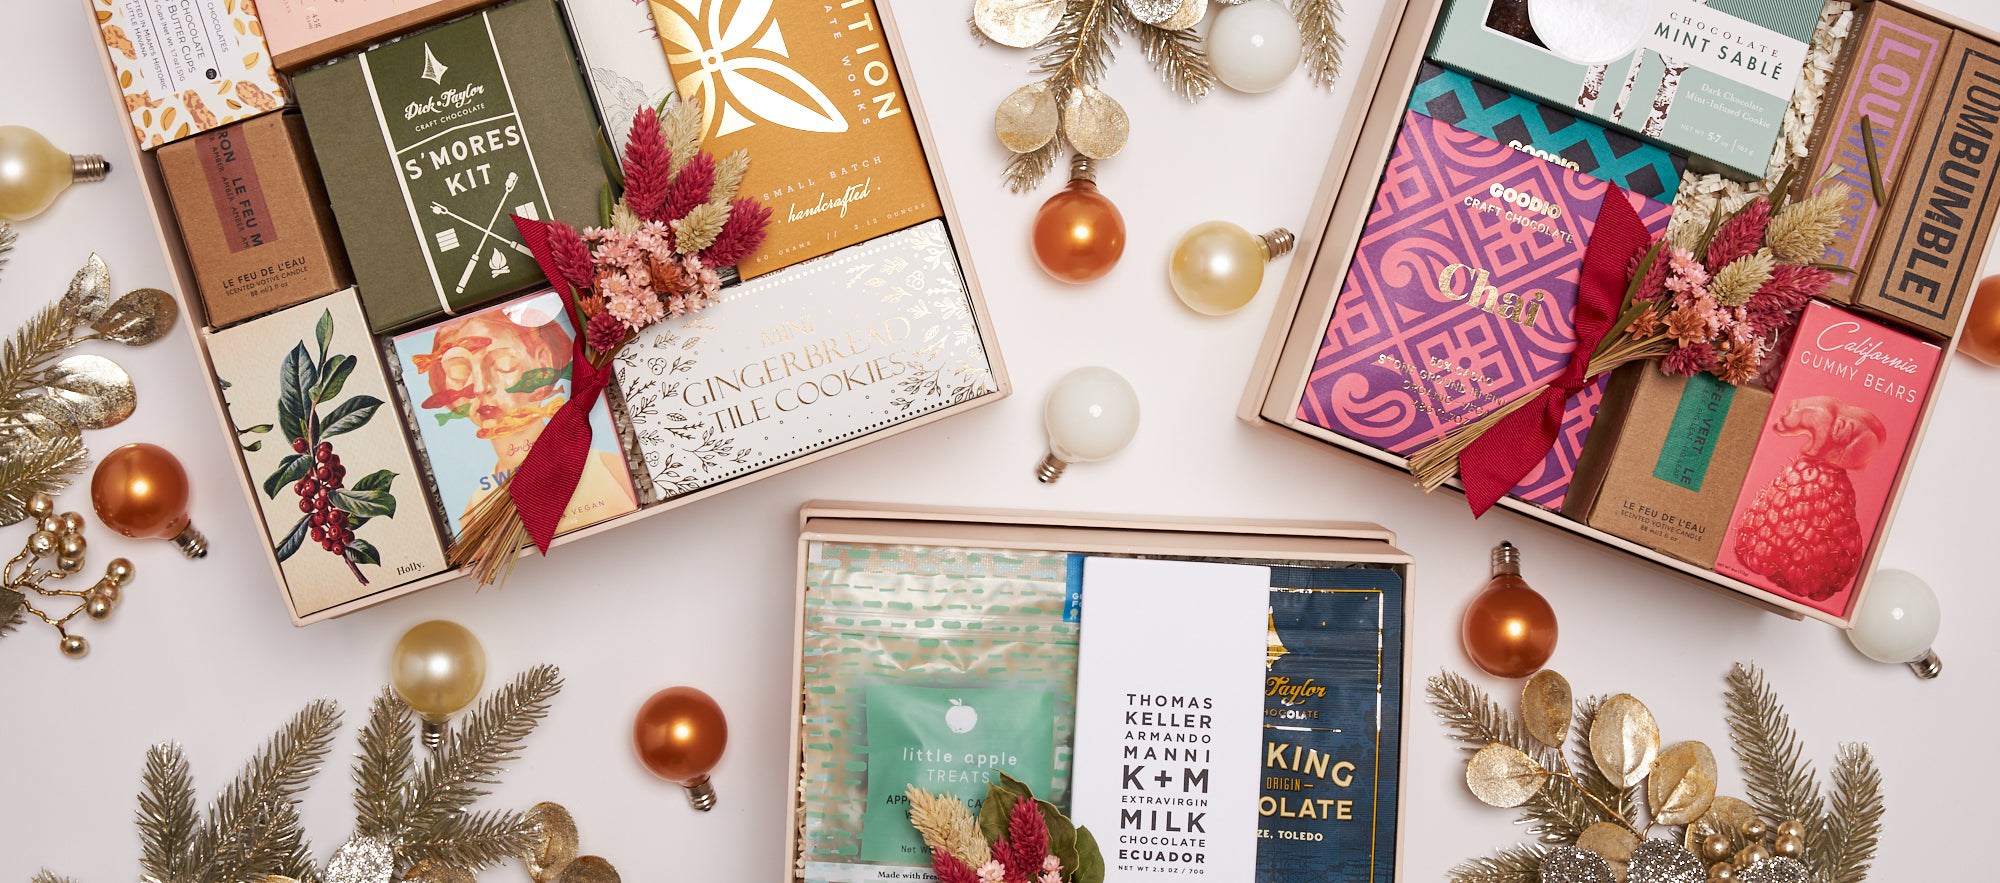 Gift Boxes for Holidays from Valleybrink Road